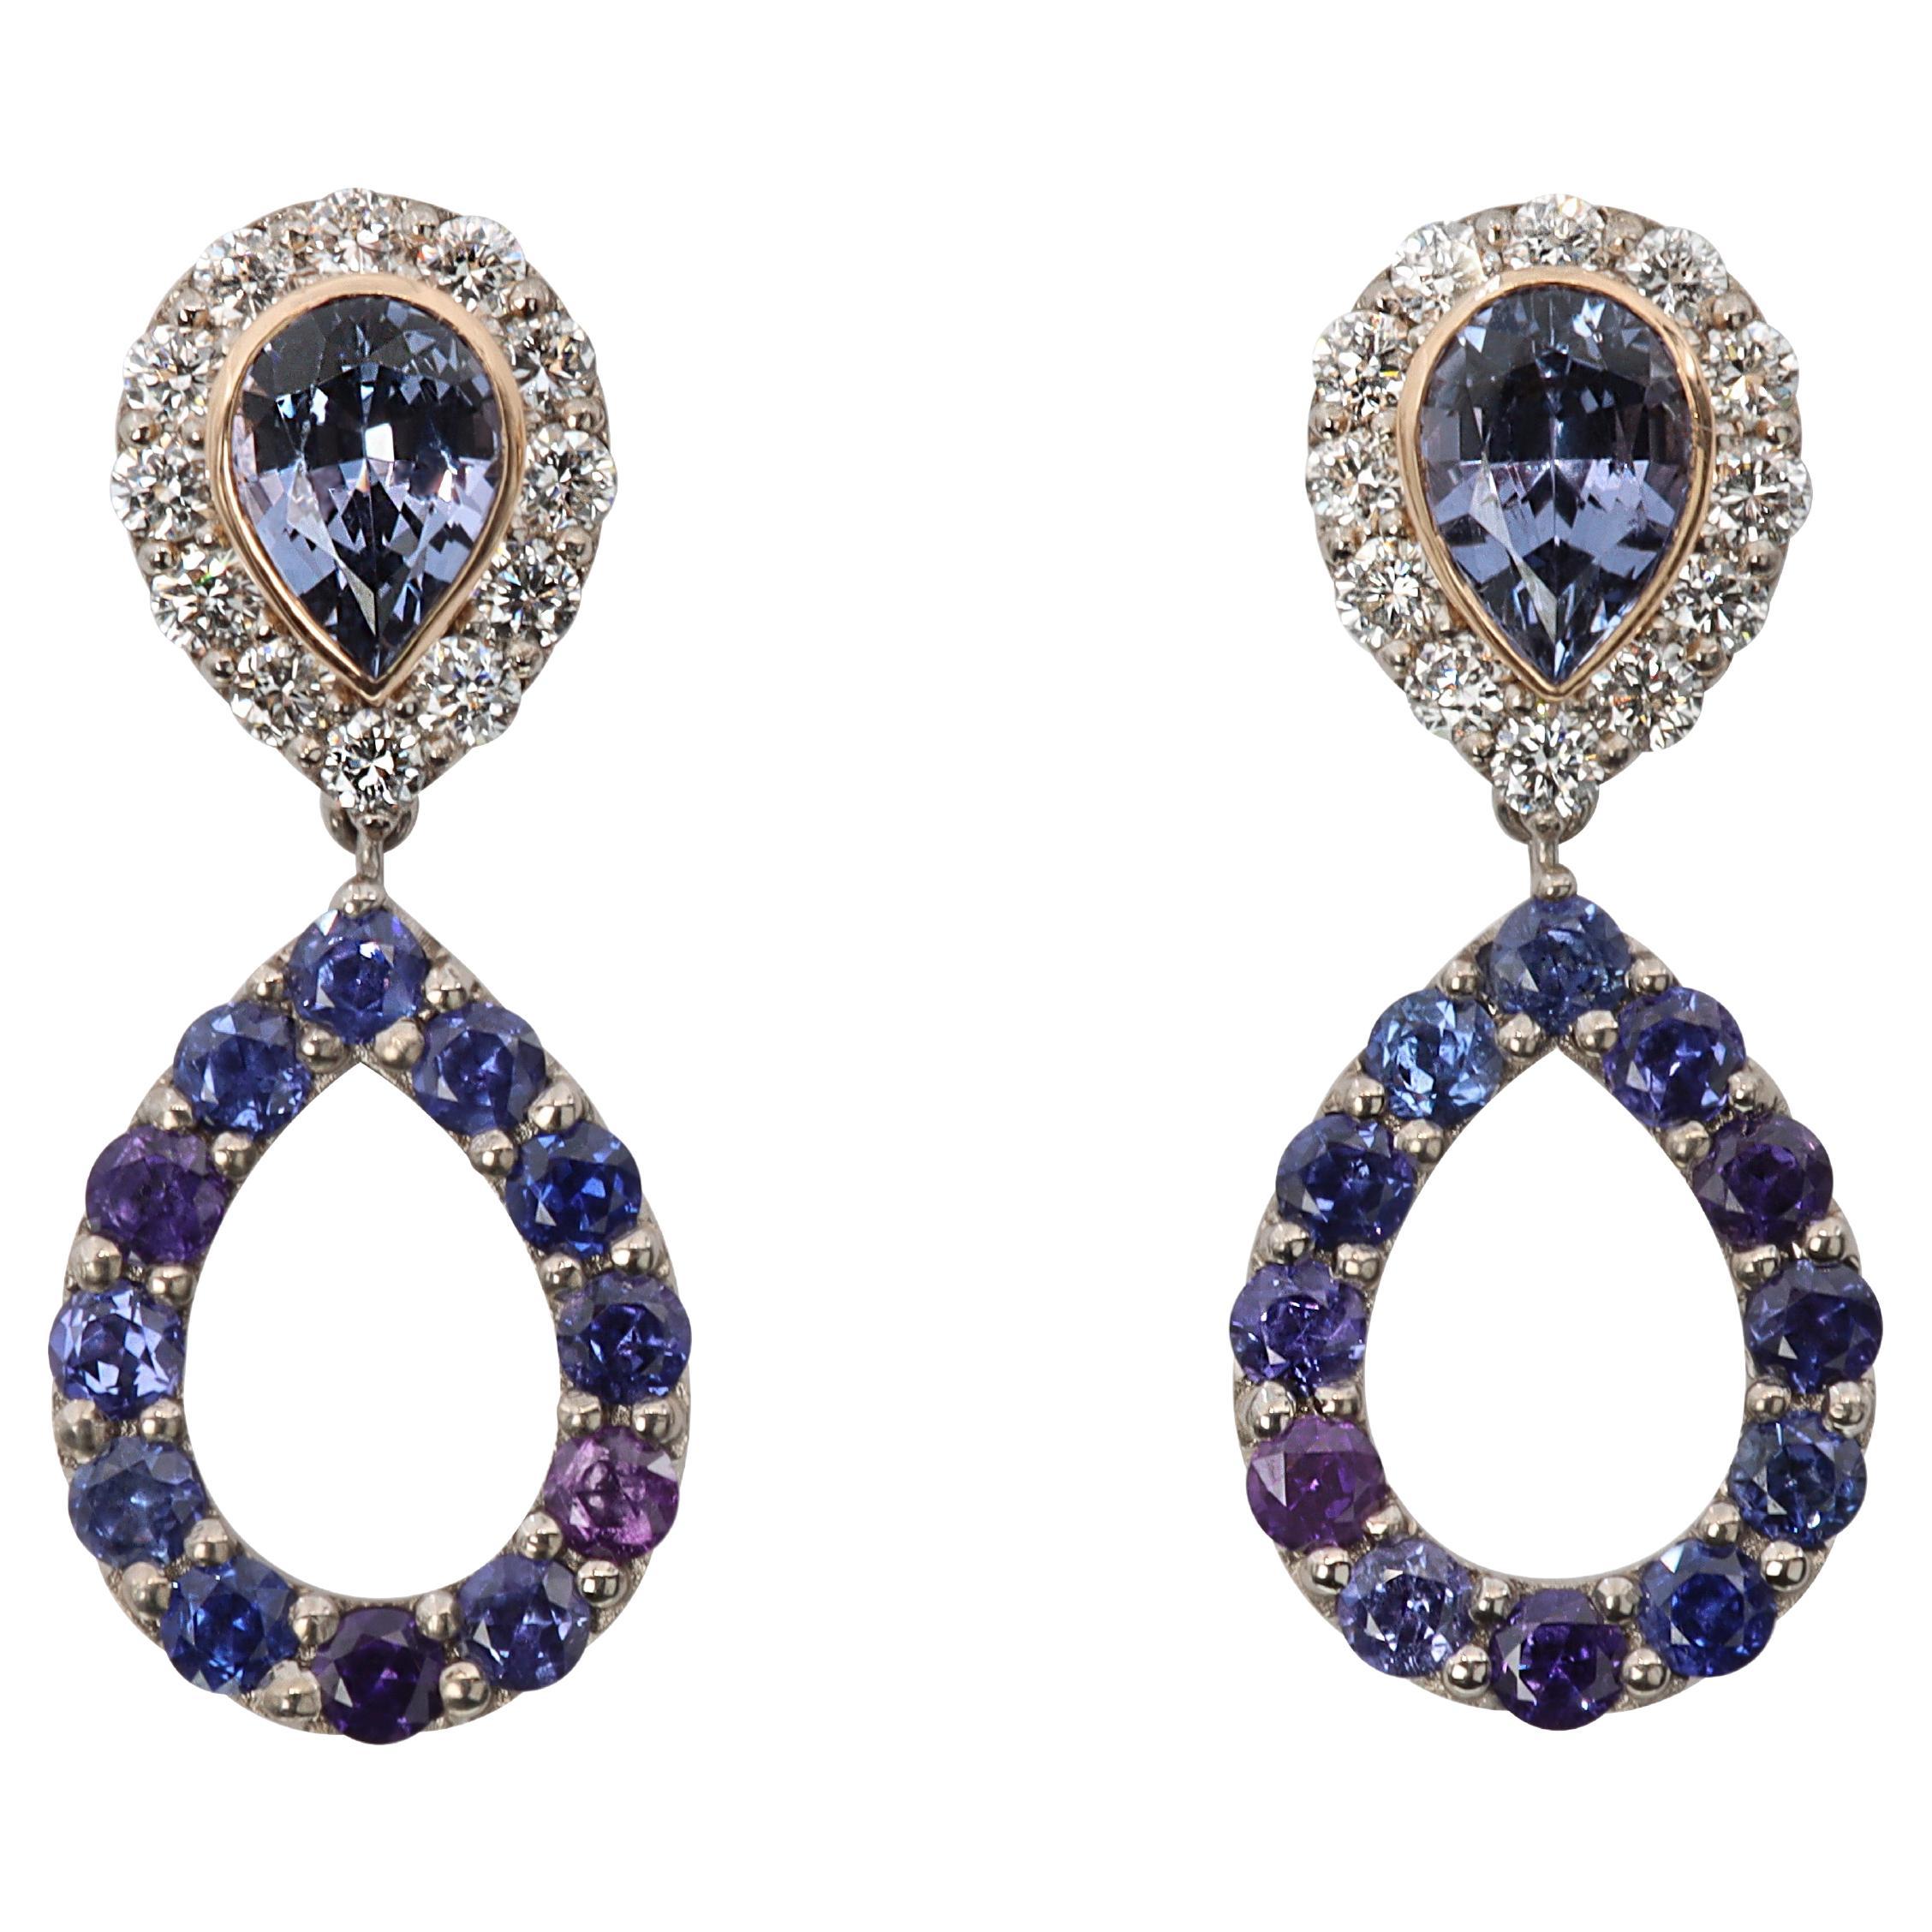 These one-of-a-kind earrings, by Aventina-Spencer, feature twenty-four round brilliant cut Natural Traceable Madagascan Colour Change Sapphires weighting a total of 1.30 carats, two Madagascan Pear shaped Lilac Spinels weighting a total of 2.00